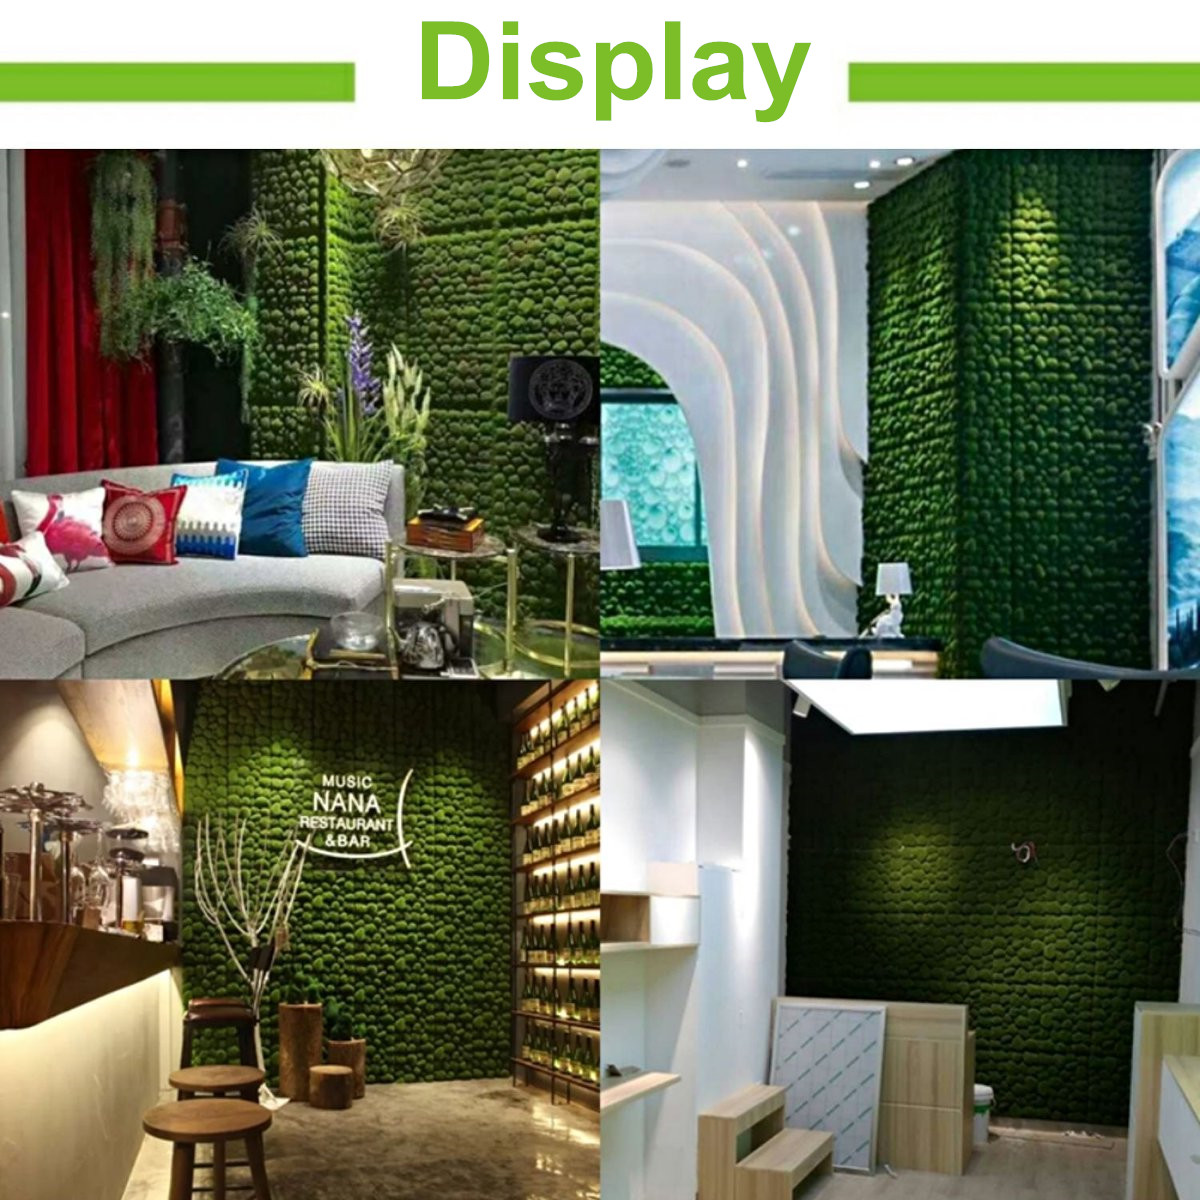 Artificial-Topiary-Hedges-Panels-Plastic-Faux-Shrubs-Fence-Mat-Greenery-Wall-Backdrop-Decor-Garden-P-1955507-3